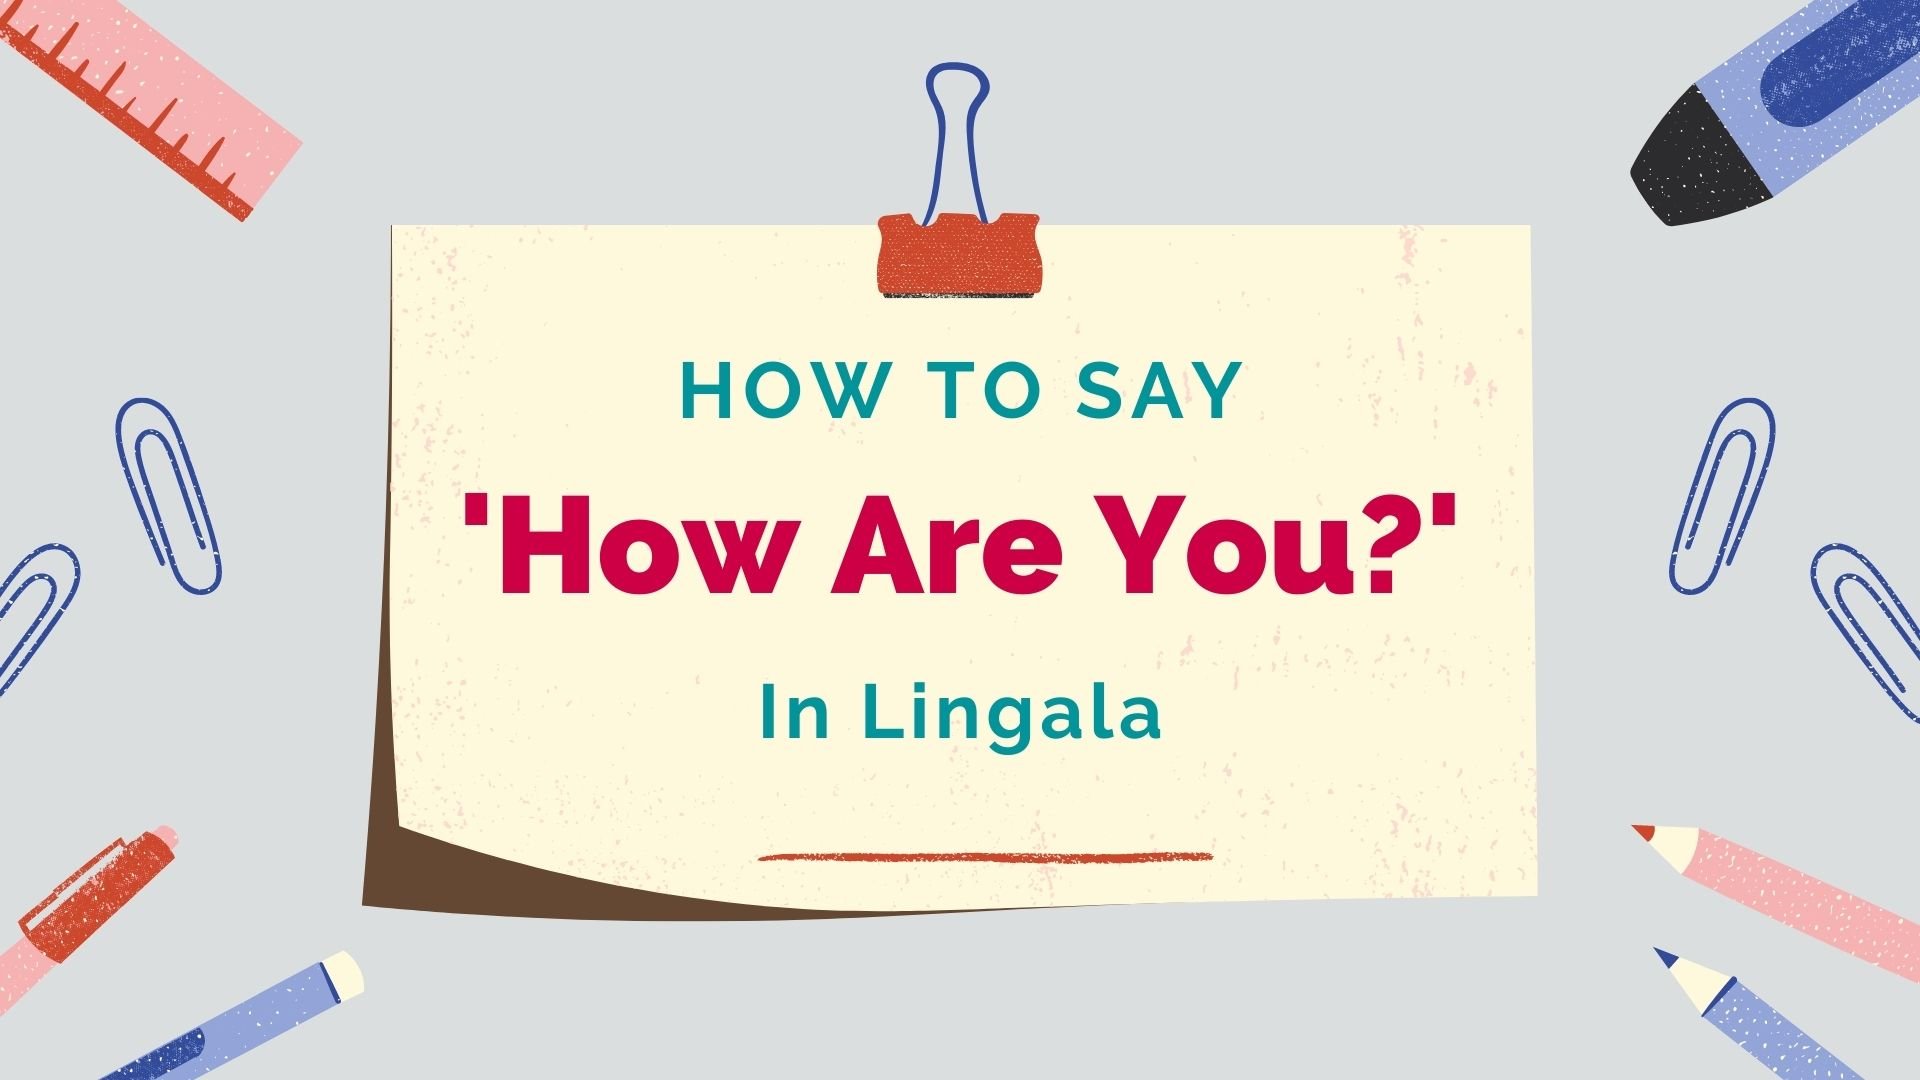 How To Say 'How Are You?' In Lingala & Common Responses - Lingalot